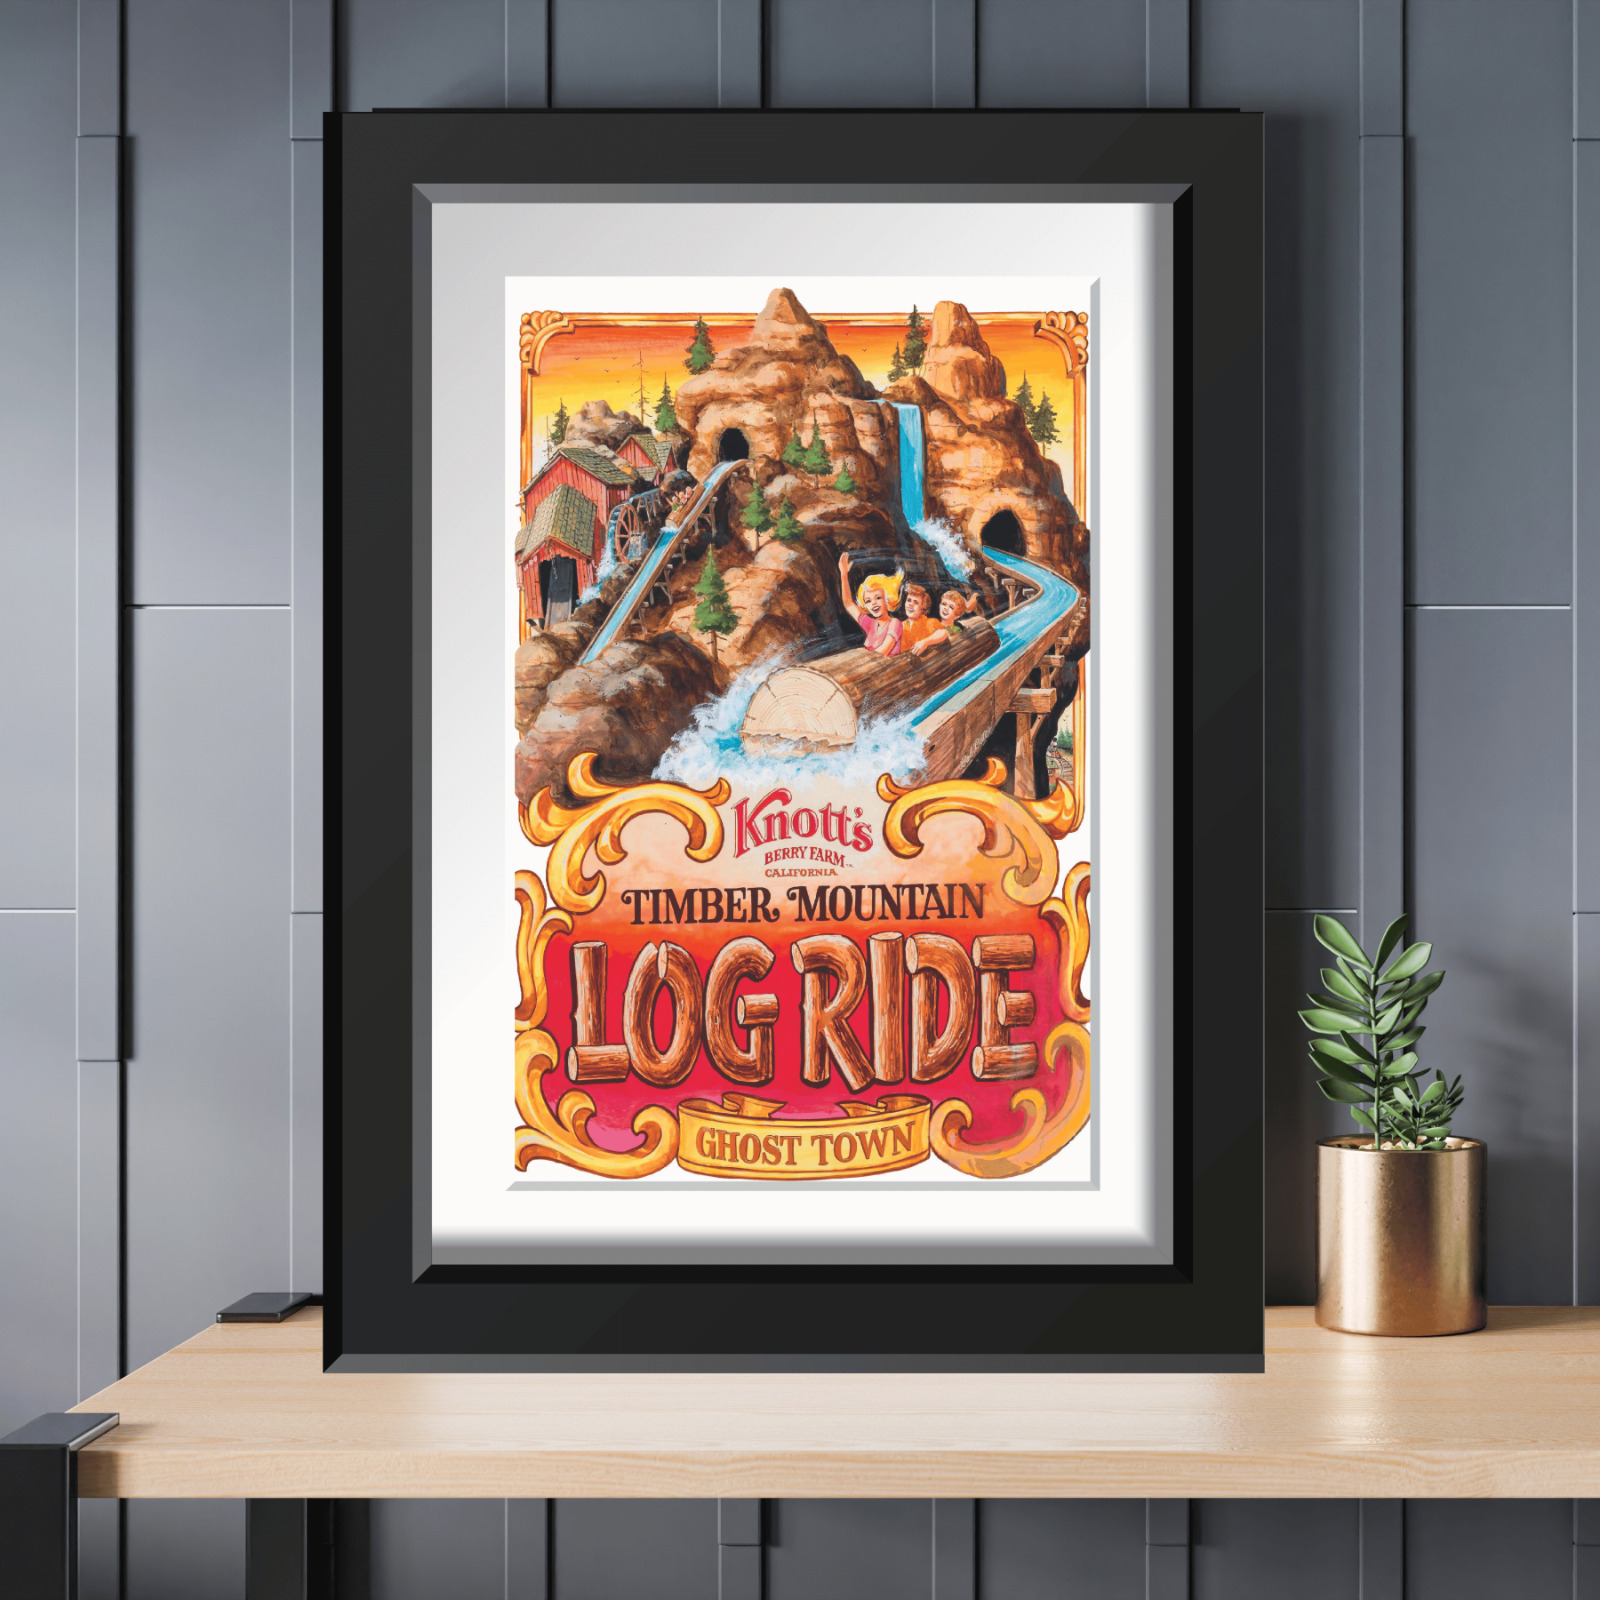 Knotts Berry Farm Timber Mountain Log Ride Vintage Restored Poster Print